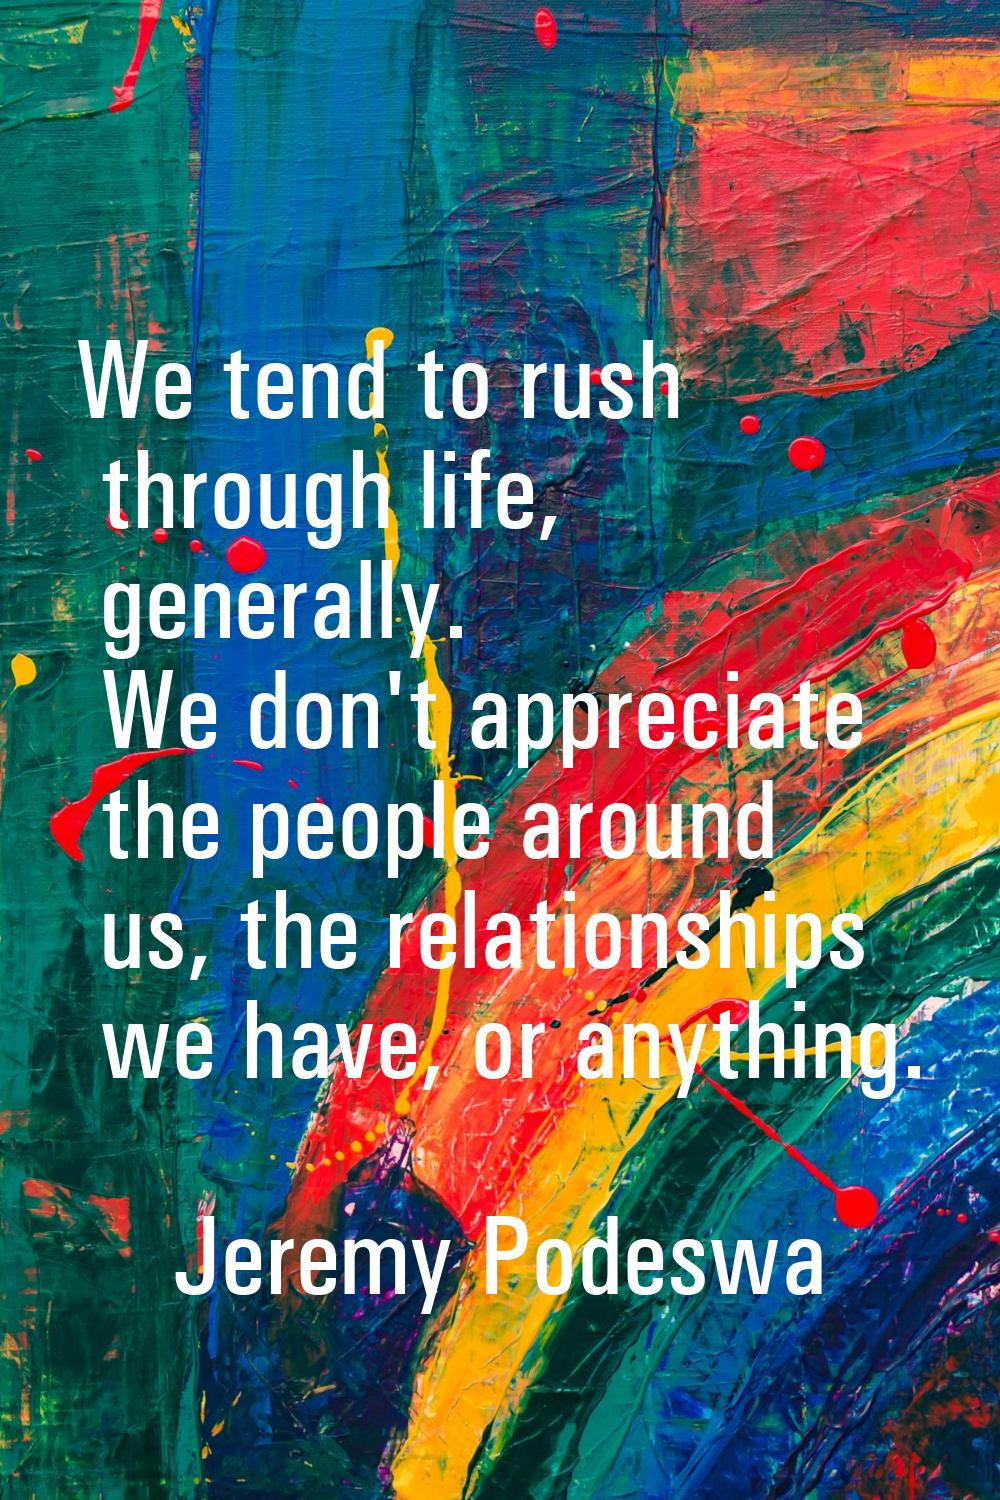 We tend to rush through life, generally. We don't appreciate the people around us, the relationship